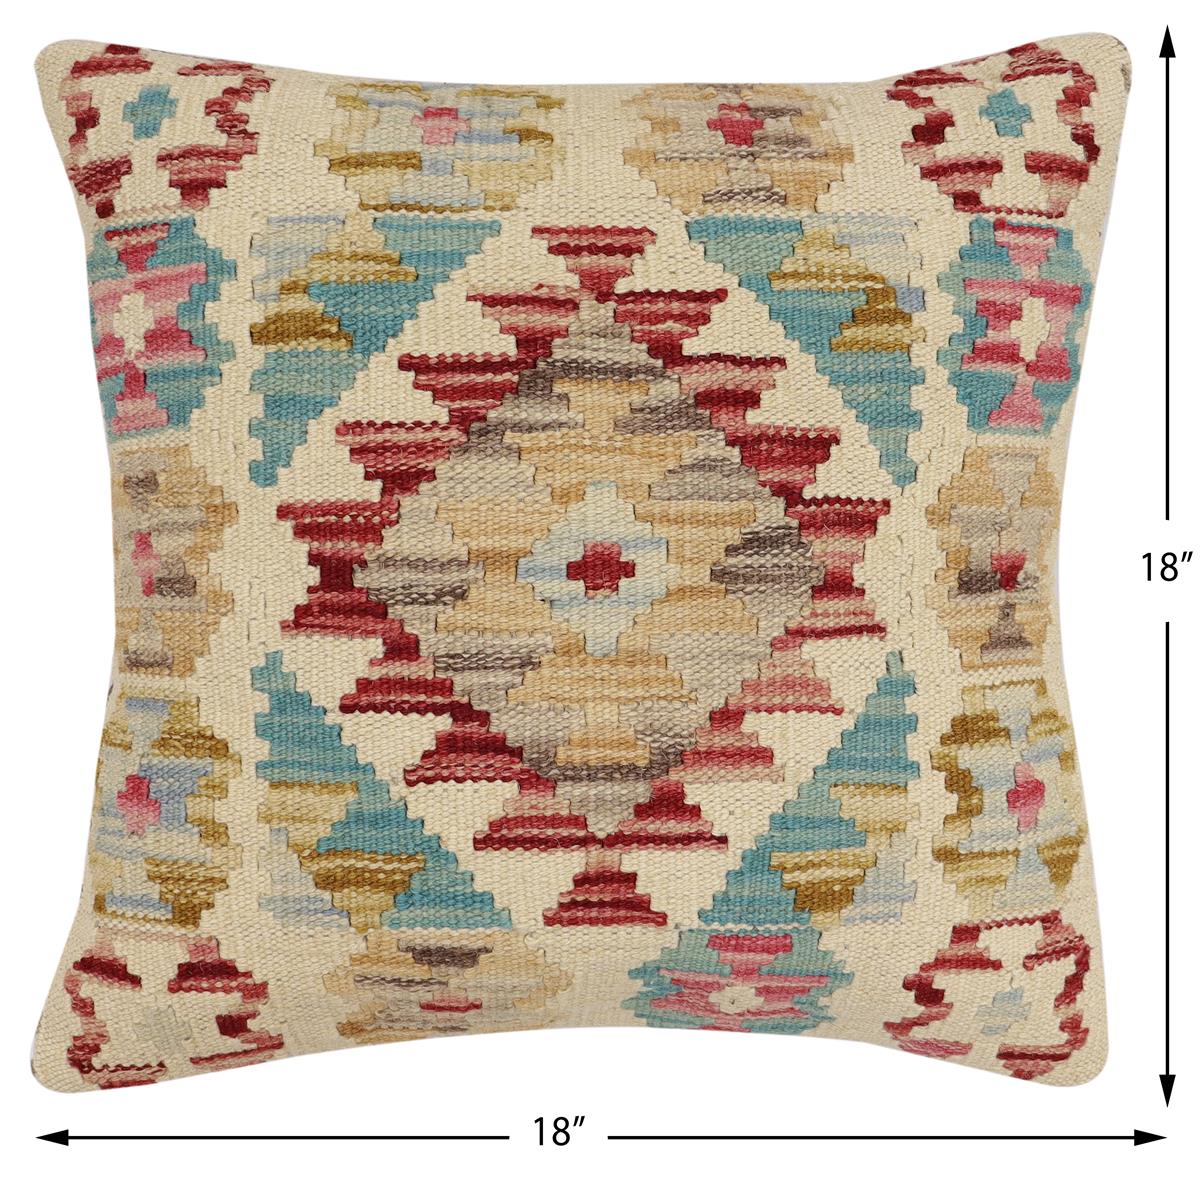 Rustic Autumn Monogrammed twill throw pillow